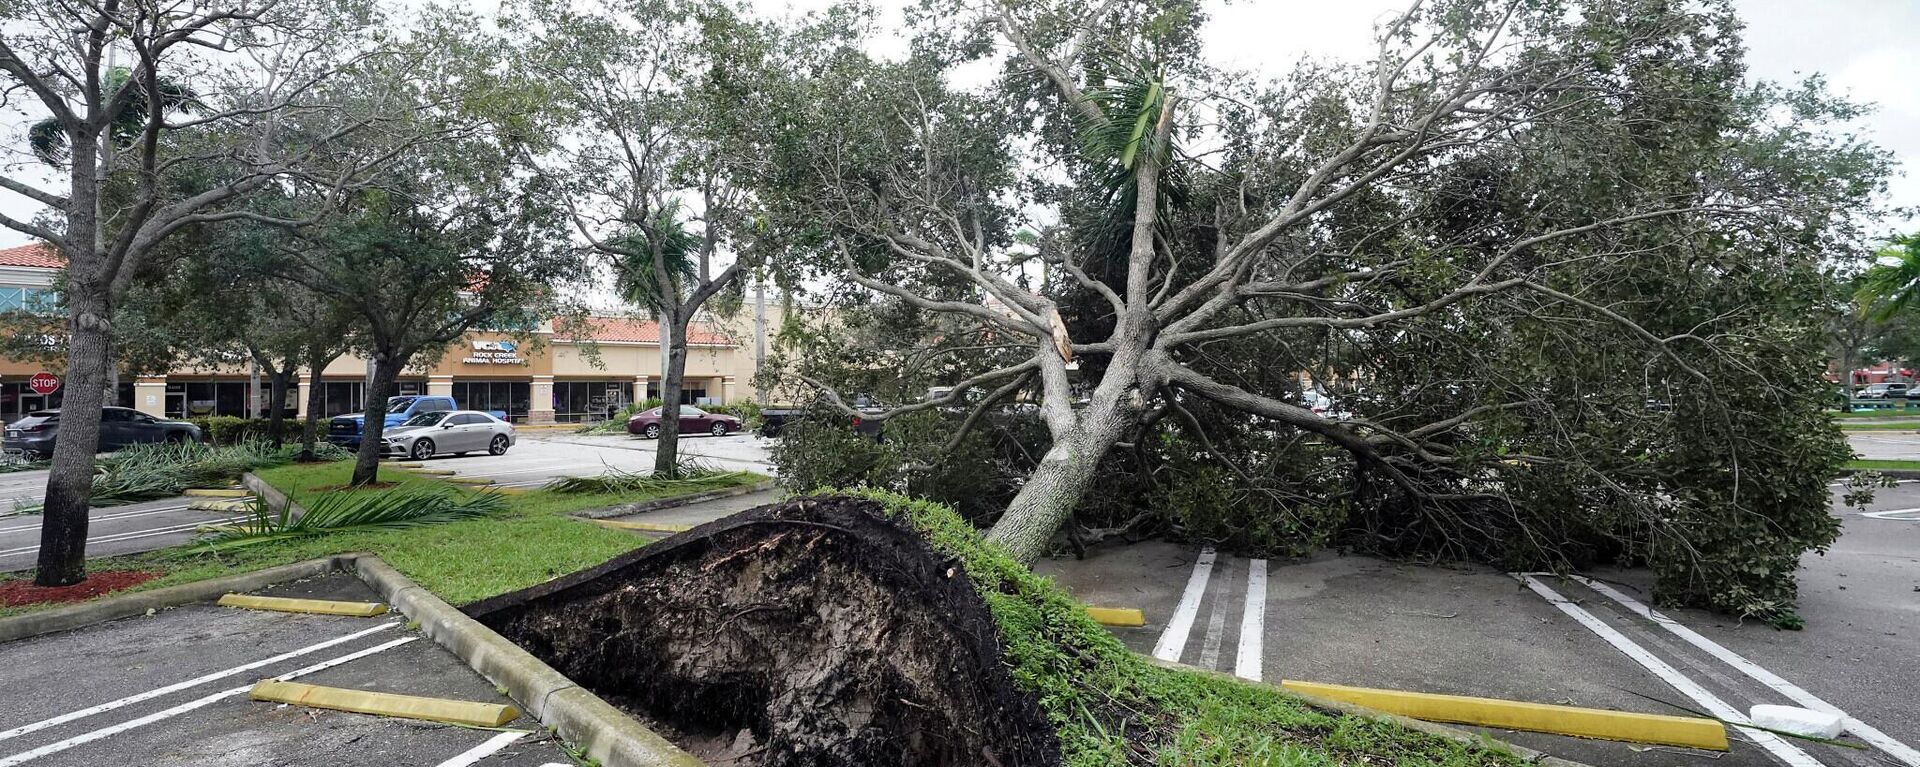 An uprooted tree, toppled by strong winds from the outer bands of Hurricane Ian, rests in a parking lot of a shopping center, Wednesday, Sept. 28, 2022, in Cooper City, Fla.  - Sputnik International, 1920, 29.09.2022